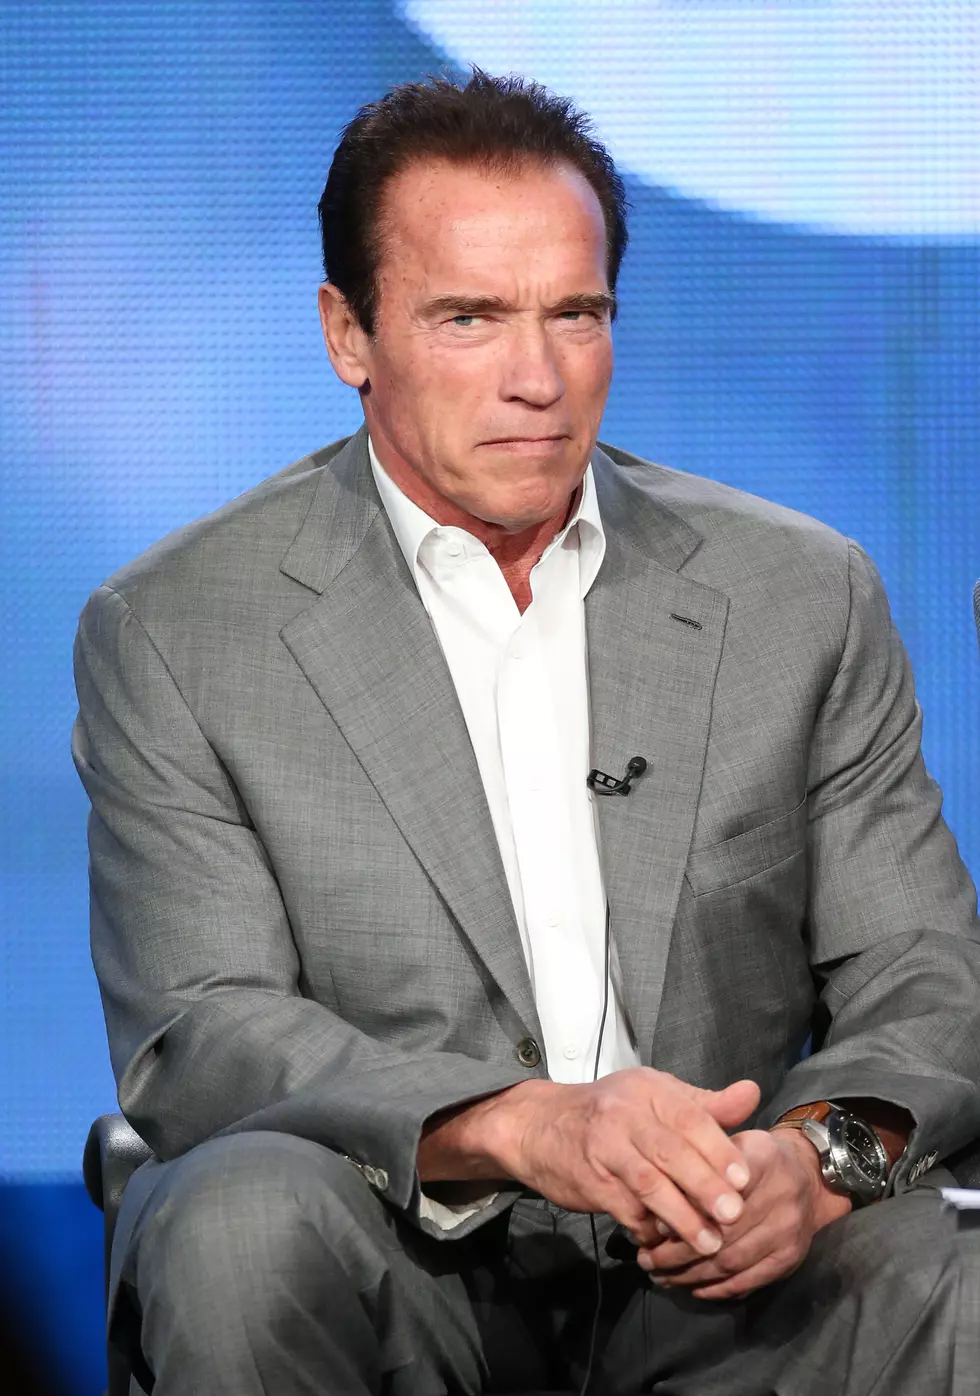 Arnold Schwarzenegger to be Inducted into WWE Hall of Fame [Video]